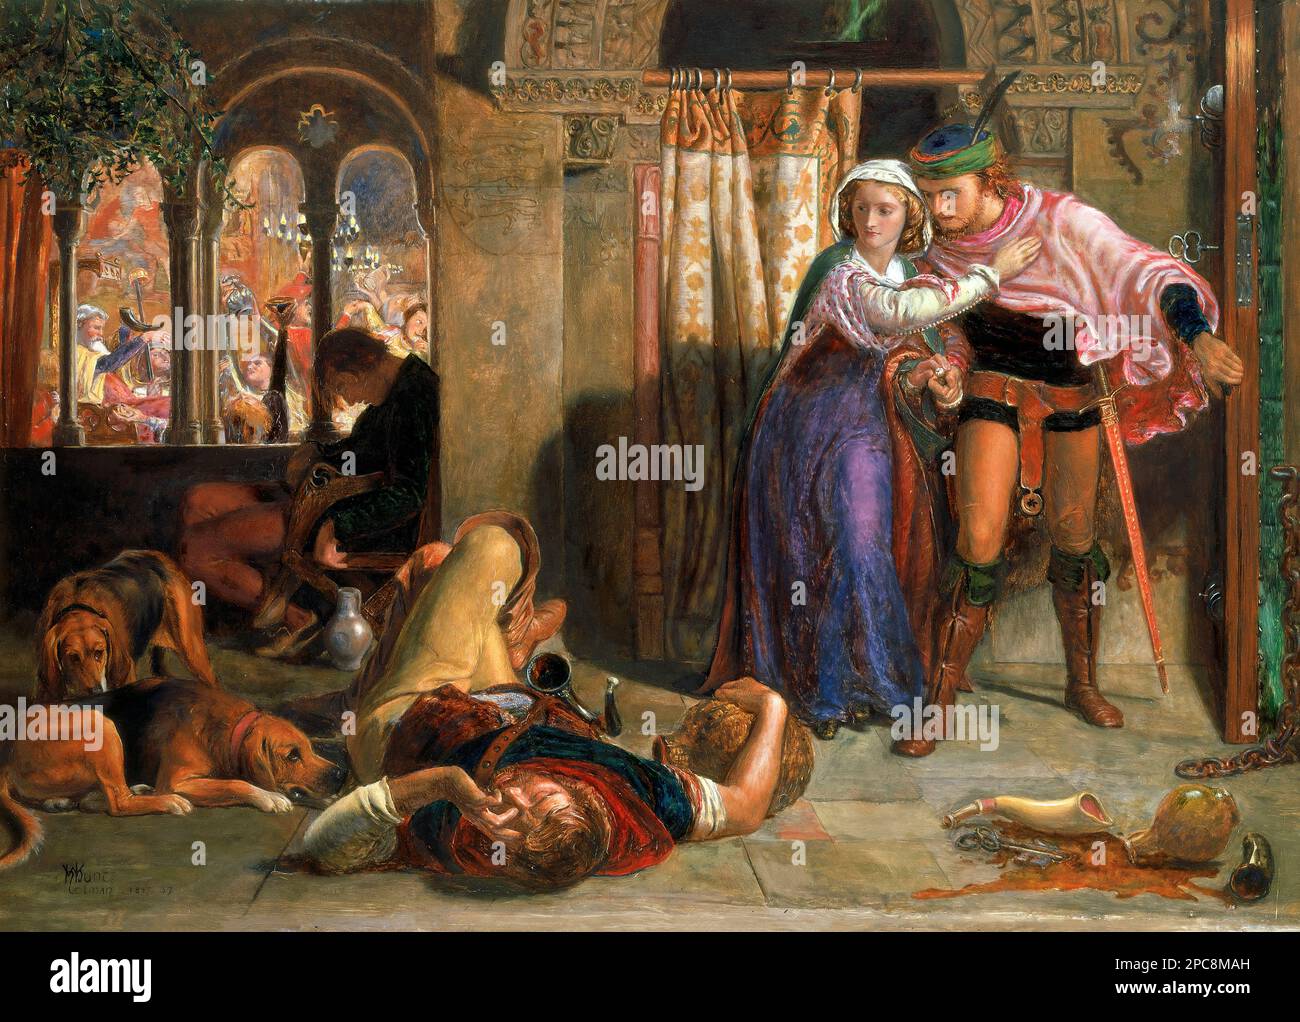 "The flight of Madeline and Porphyro during the drunkenness attending the revelry (The Eve of St. Agnes)" by William Holman Hunt (1827-1910), oil on panel, c. 1847-57. Holman Hunt was a leading figure in the 19th century Pre-Raphaelite Movement. Stock Photo